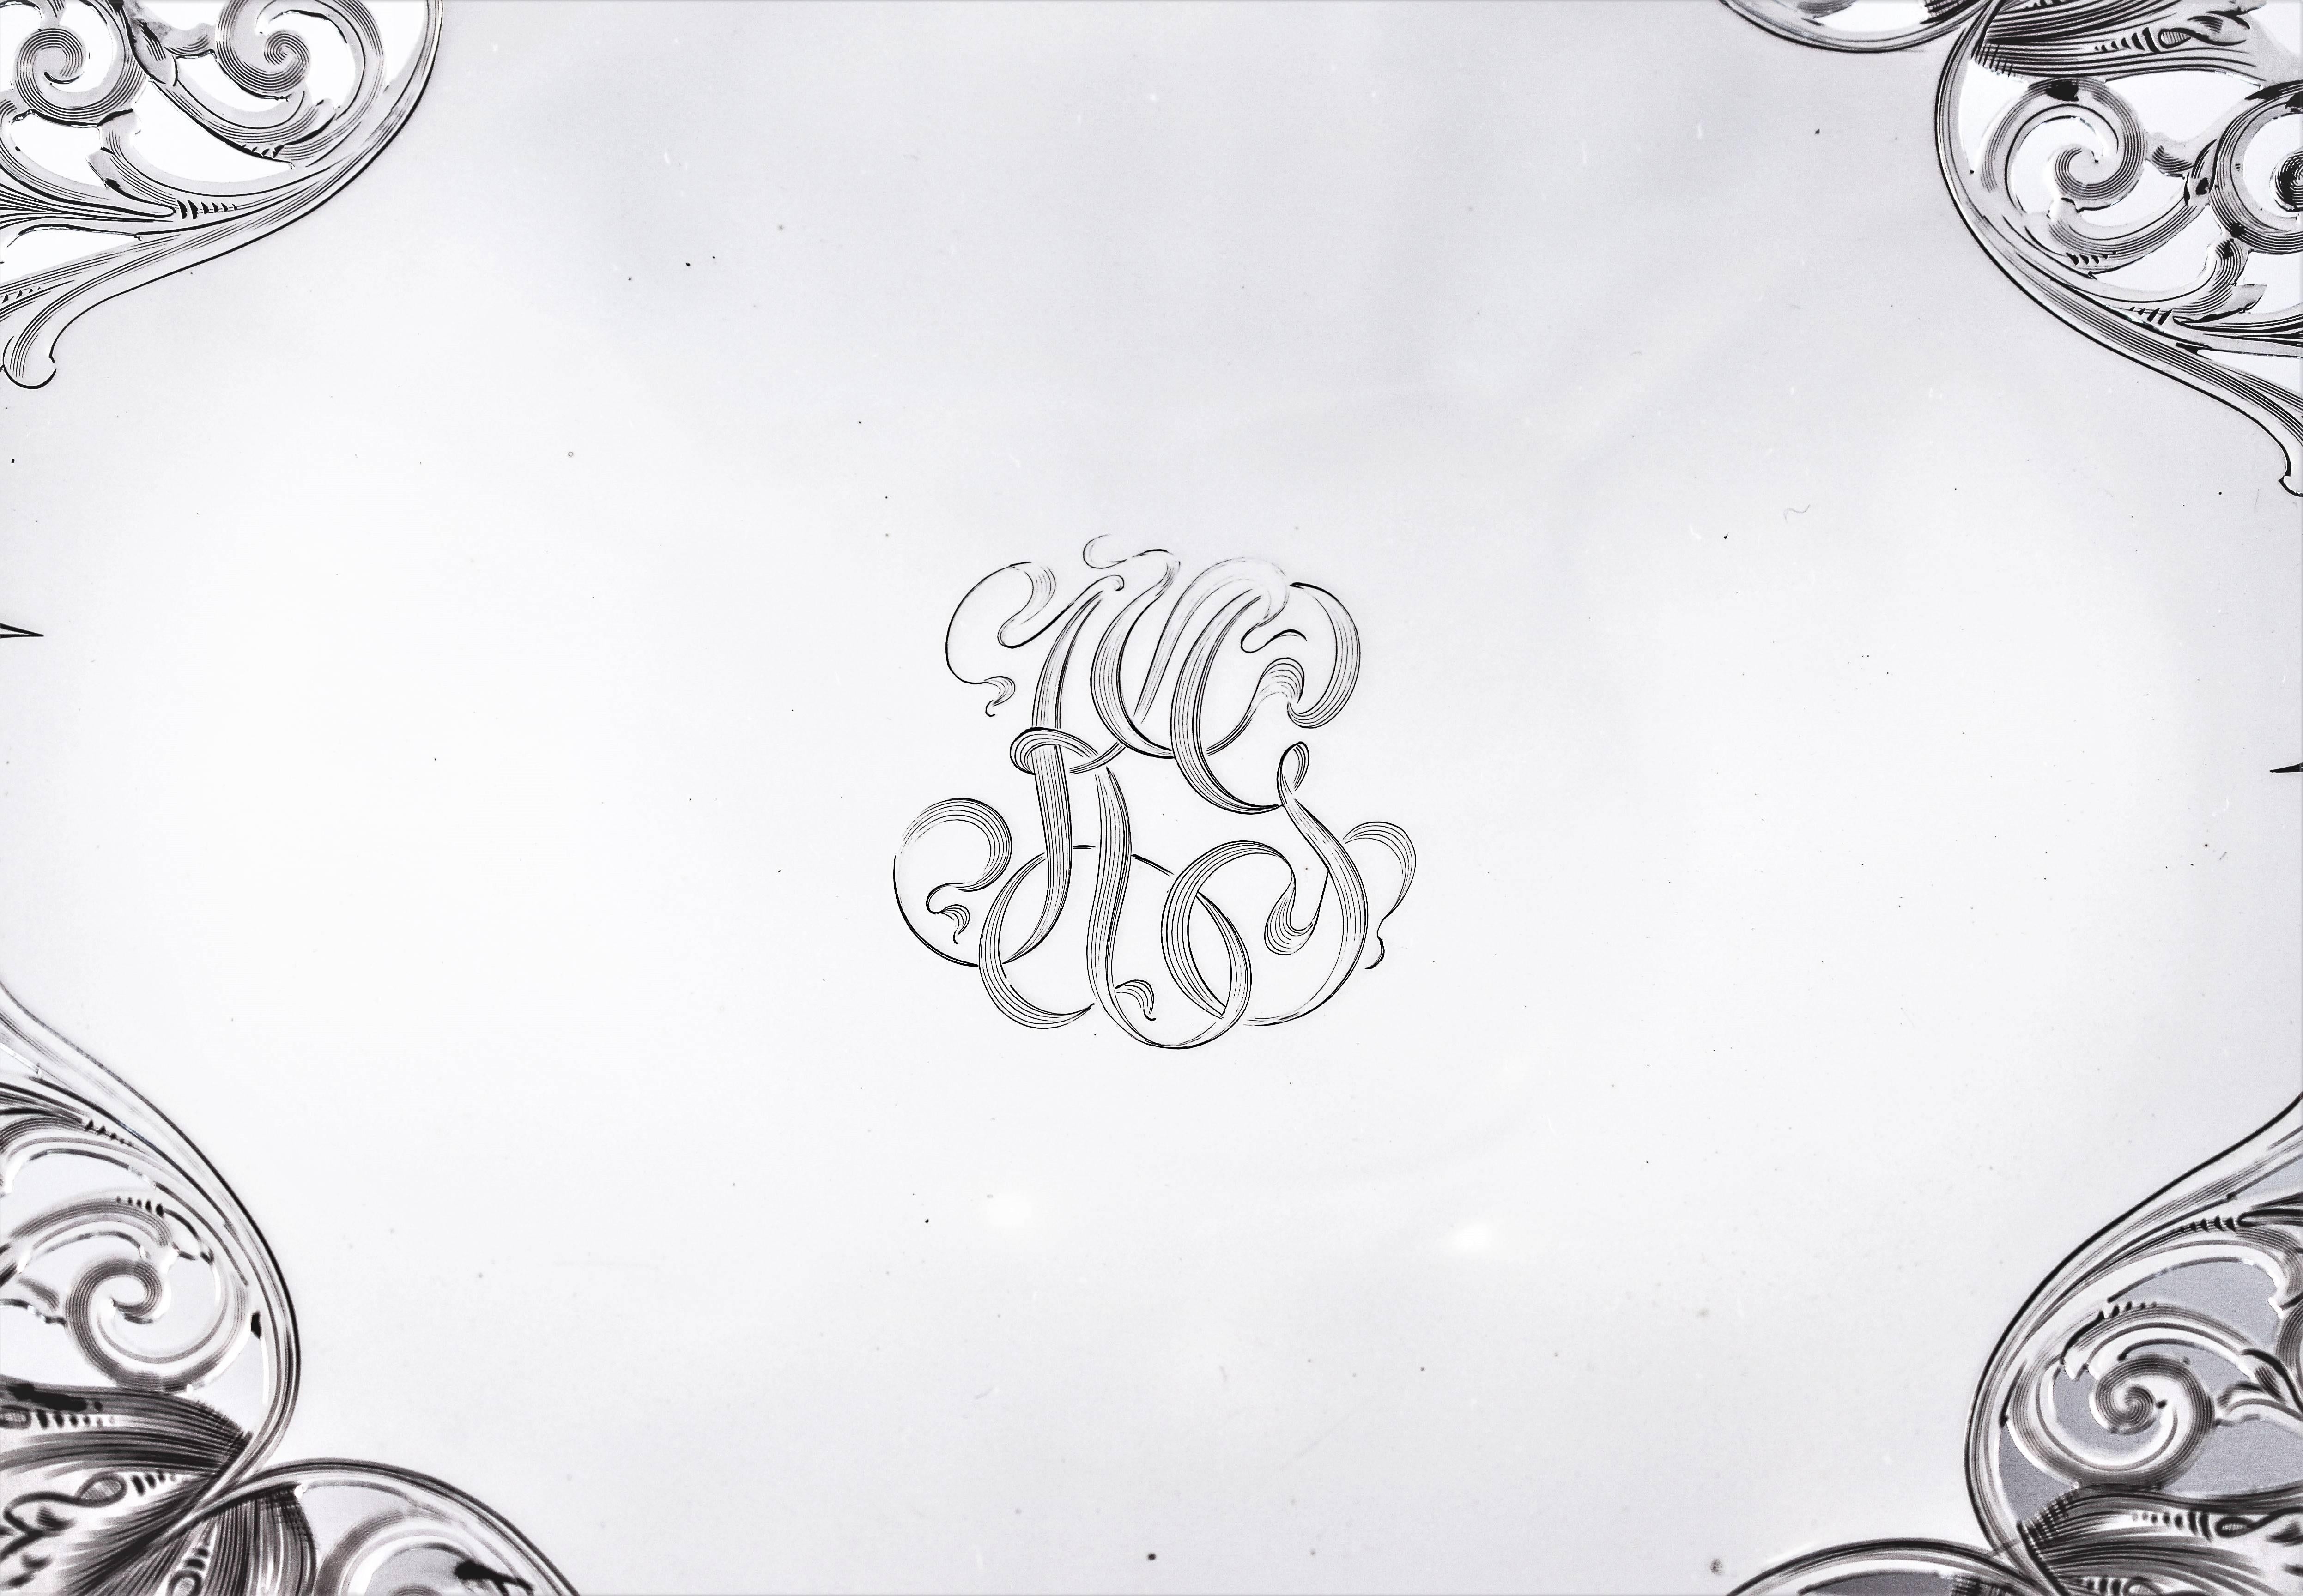 Resting on a center pedestal, this dish has delicate openwork around the corners. But don’t let the openwork fool you, this is a heavy solid piece. We also love the hand engraved monogram in the center.